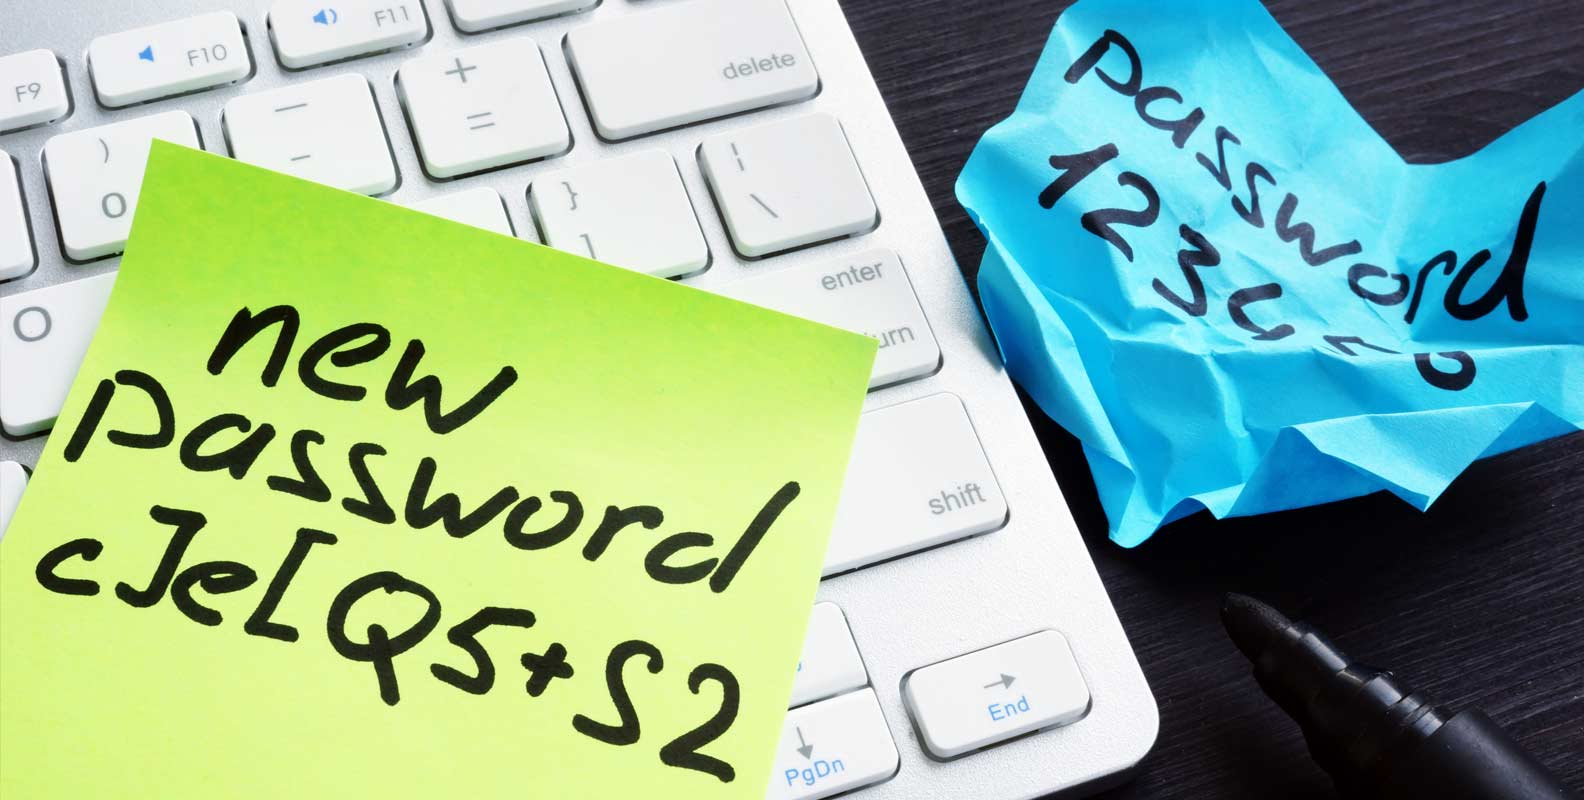 Using sticky notes to manage passwords